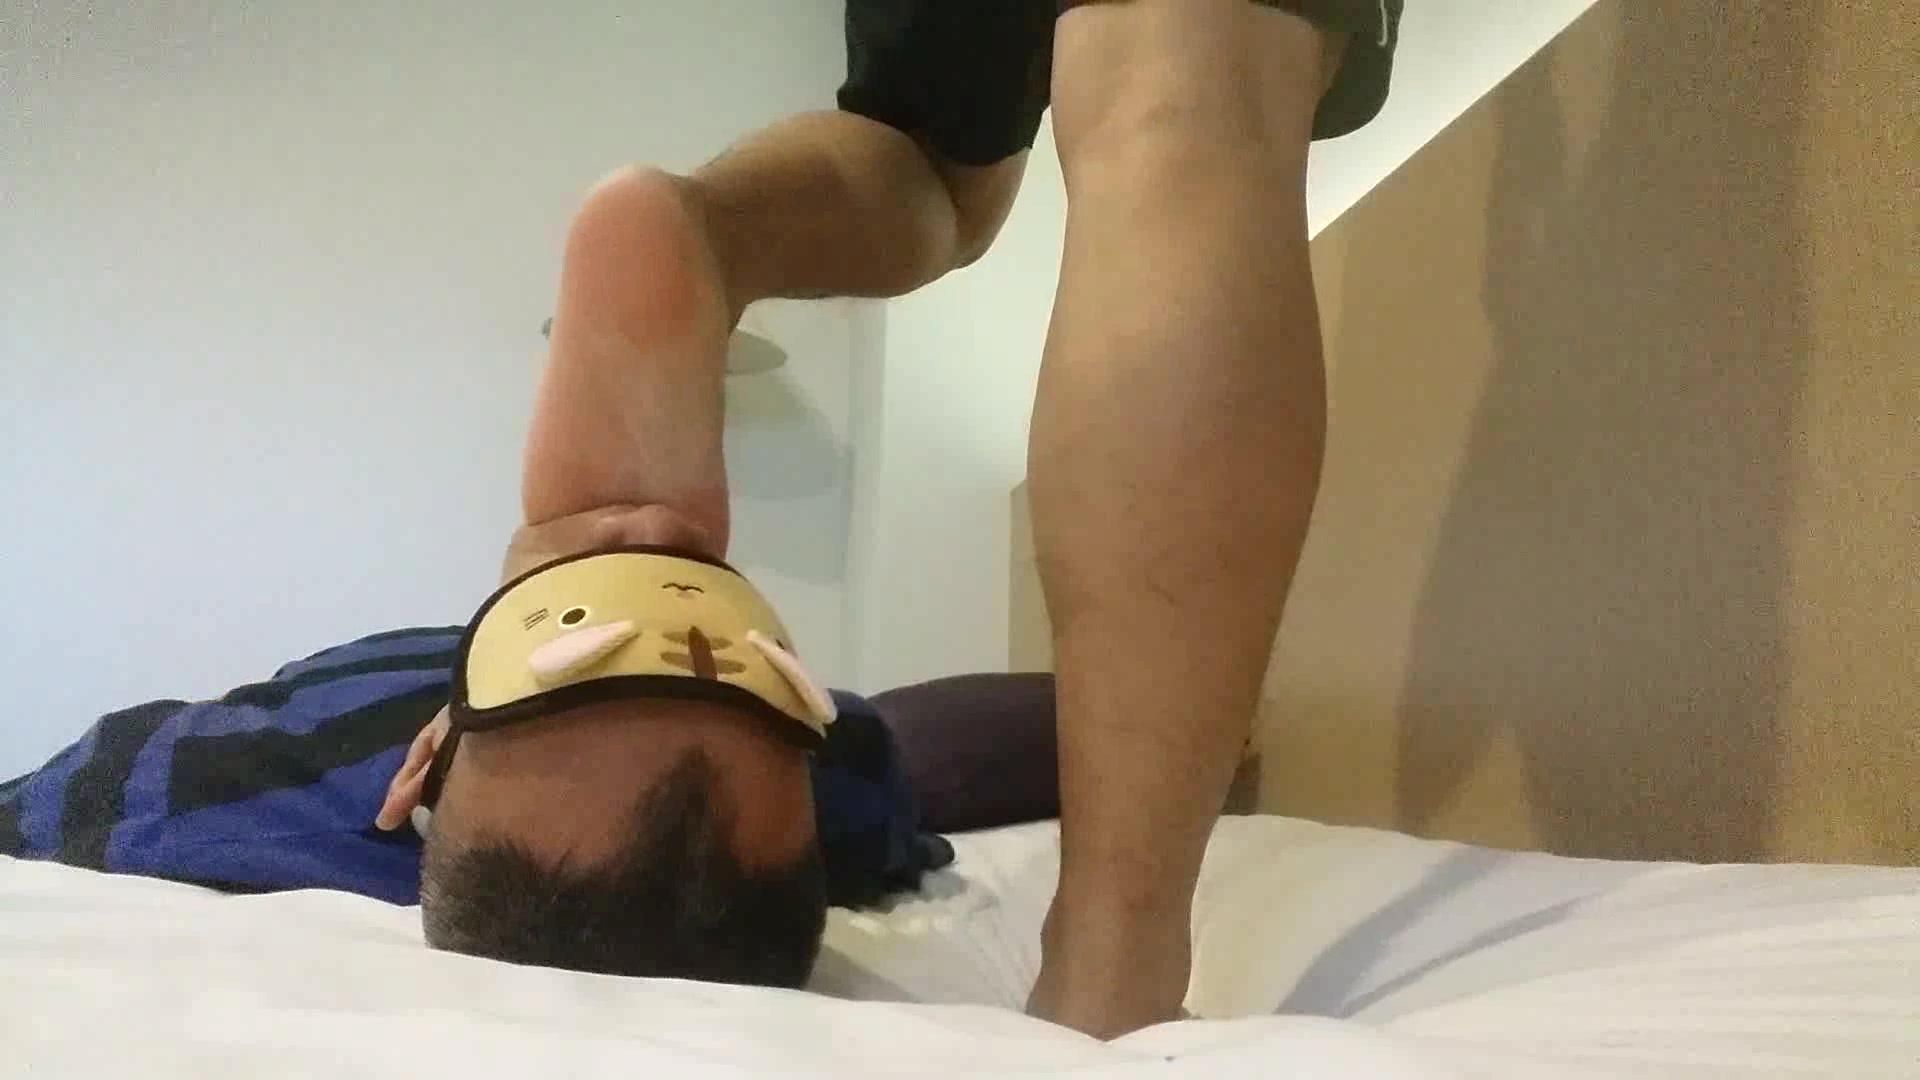 Foot in mouth - video 2